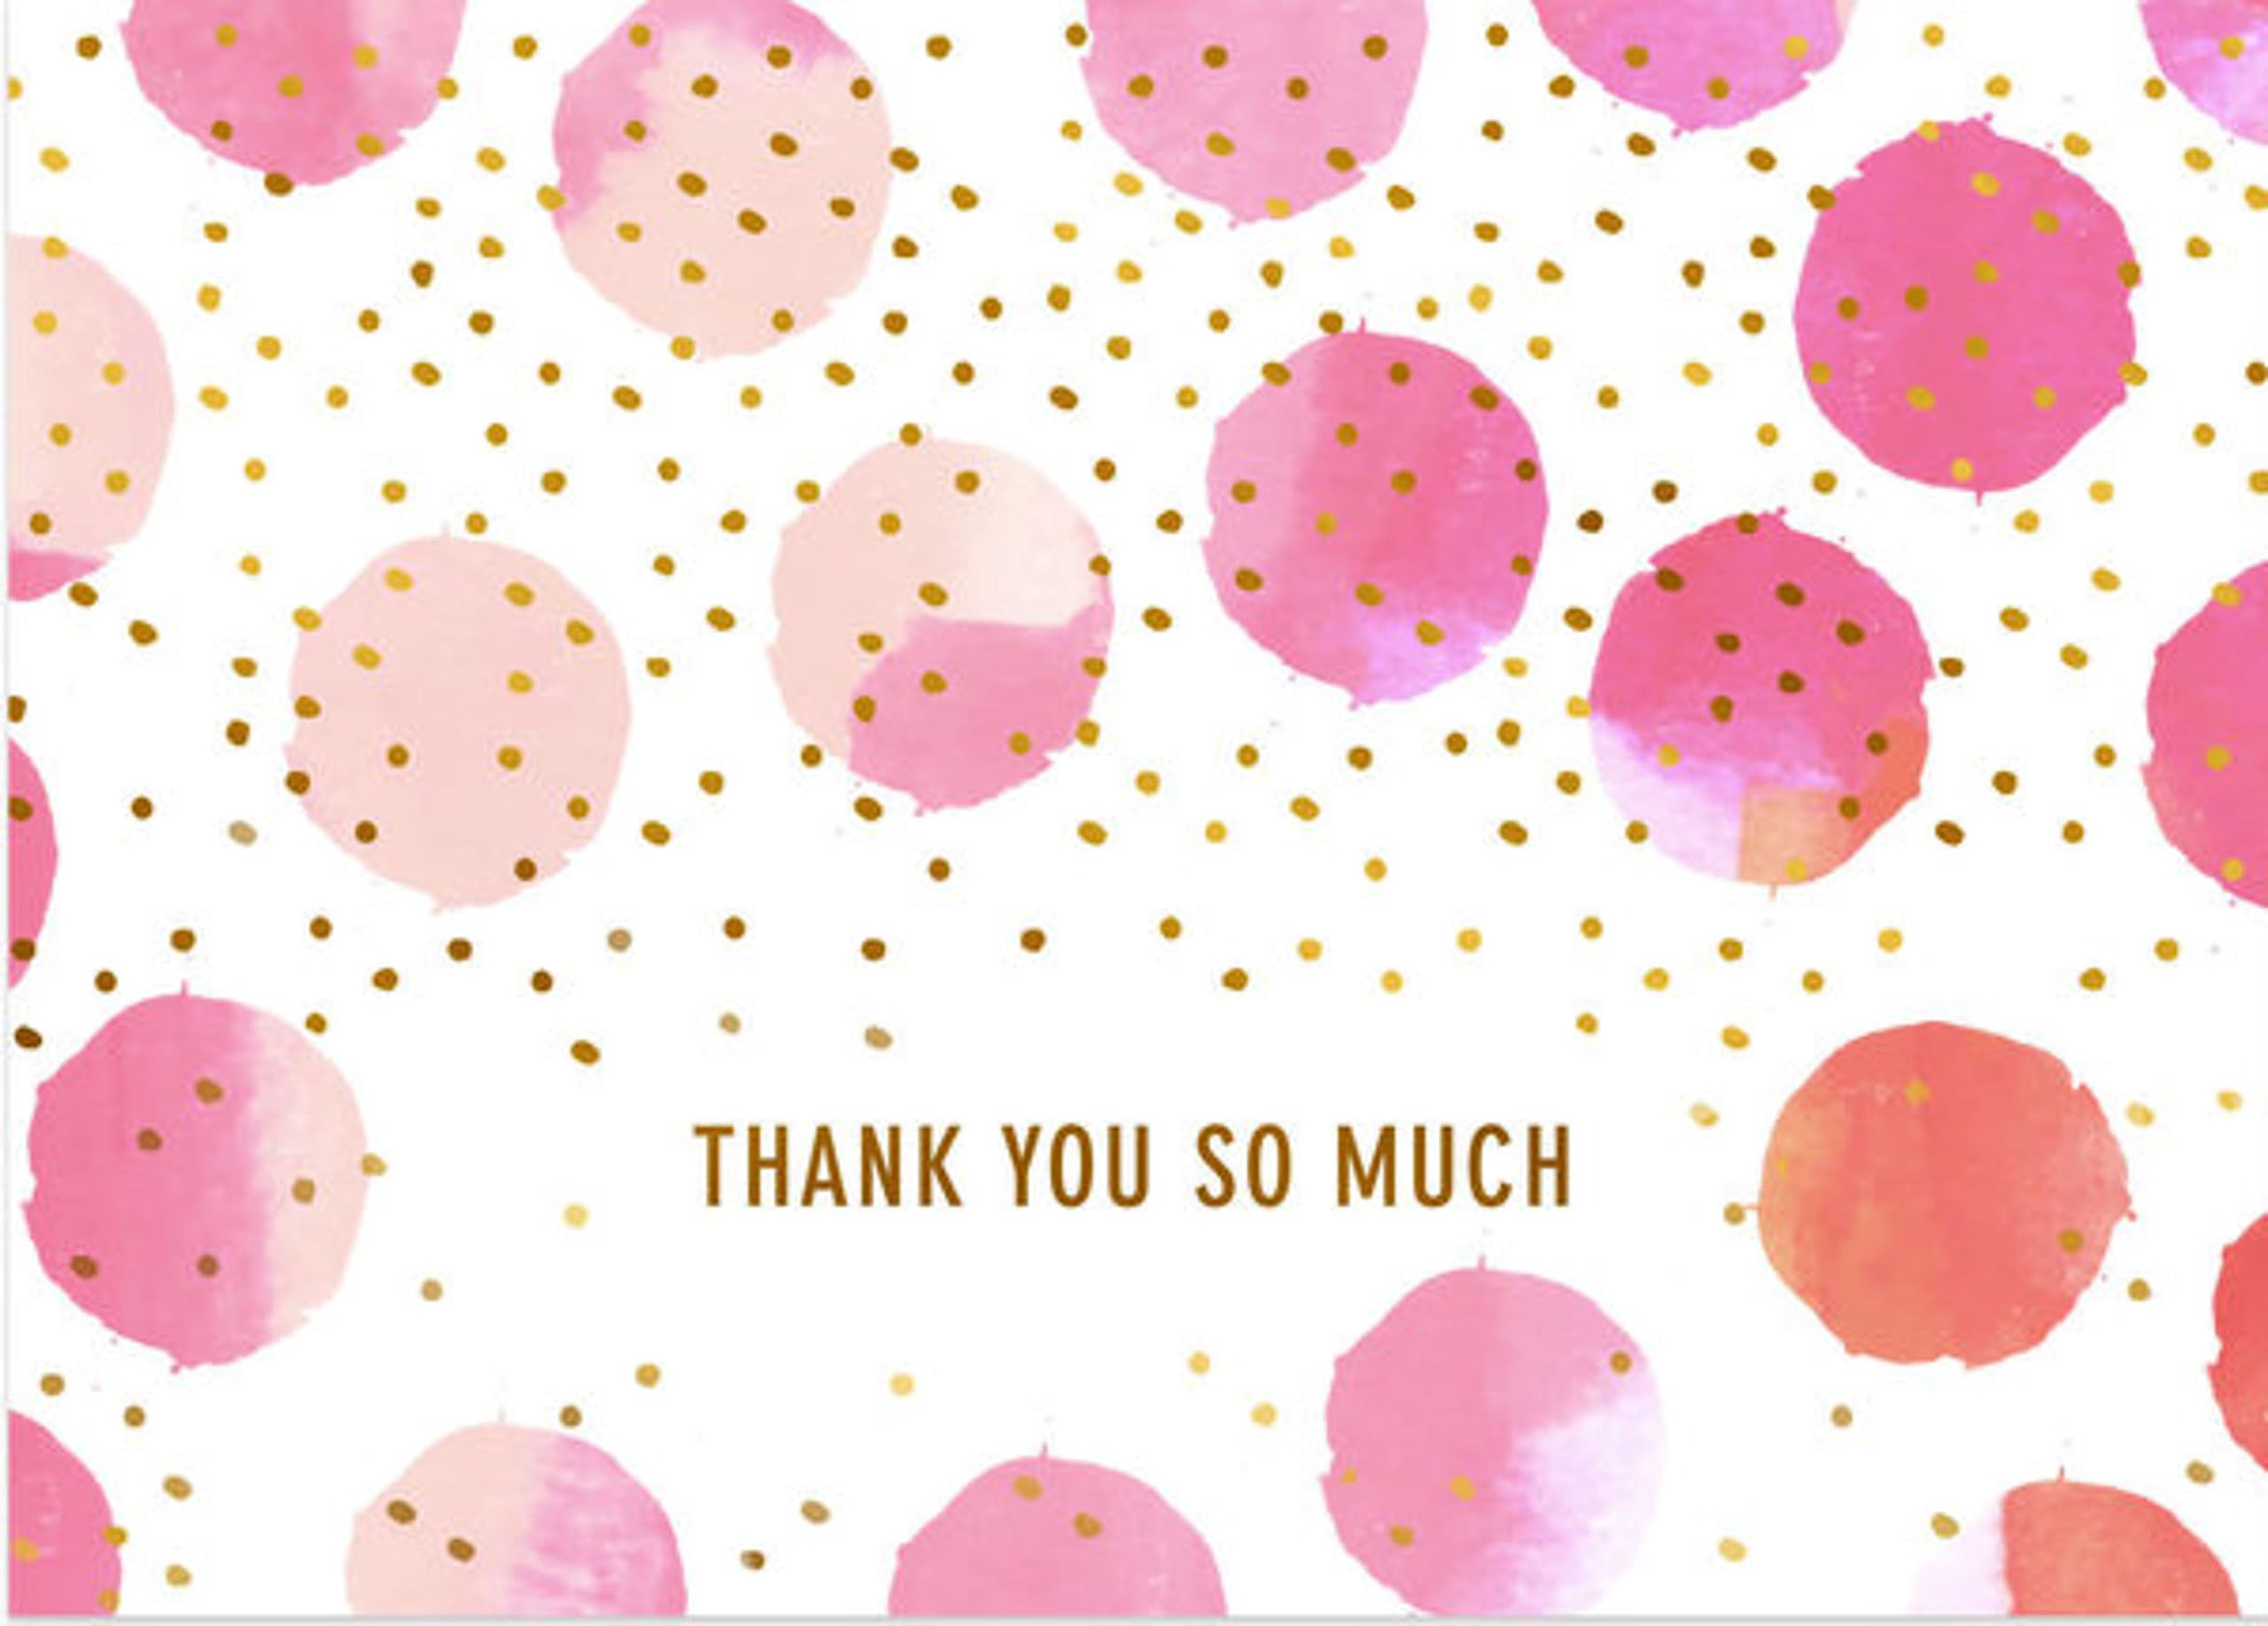 Hallmark Thank You Cards Assortment, Pink and Gold Watercolor (40 Thank You Notes with Envelopes for Wedding, Bridal Shower, Baby Shower, Business, Graduation)